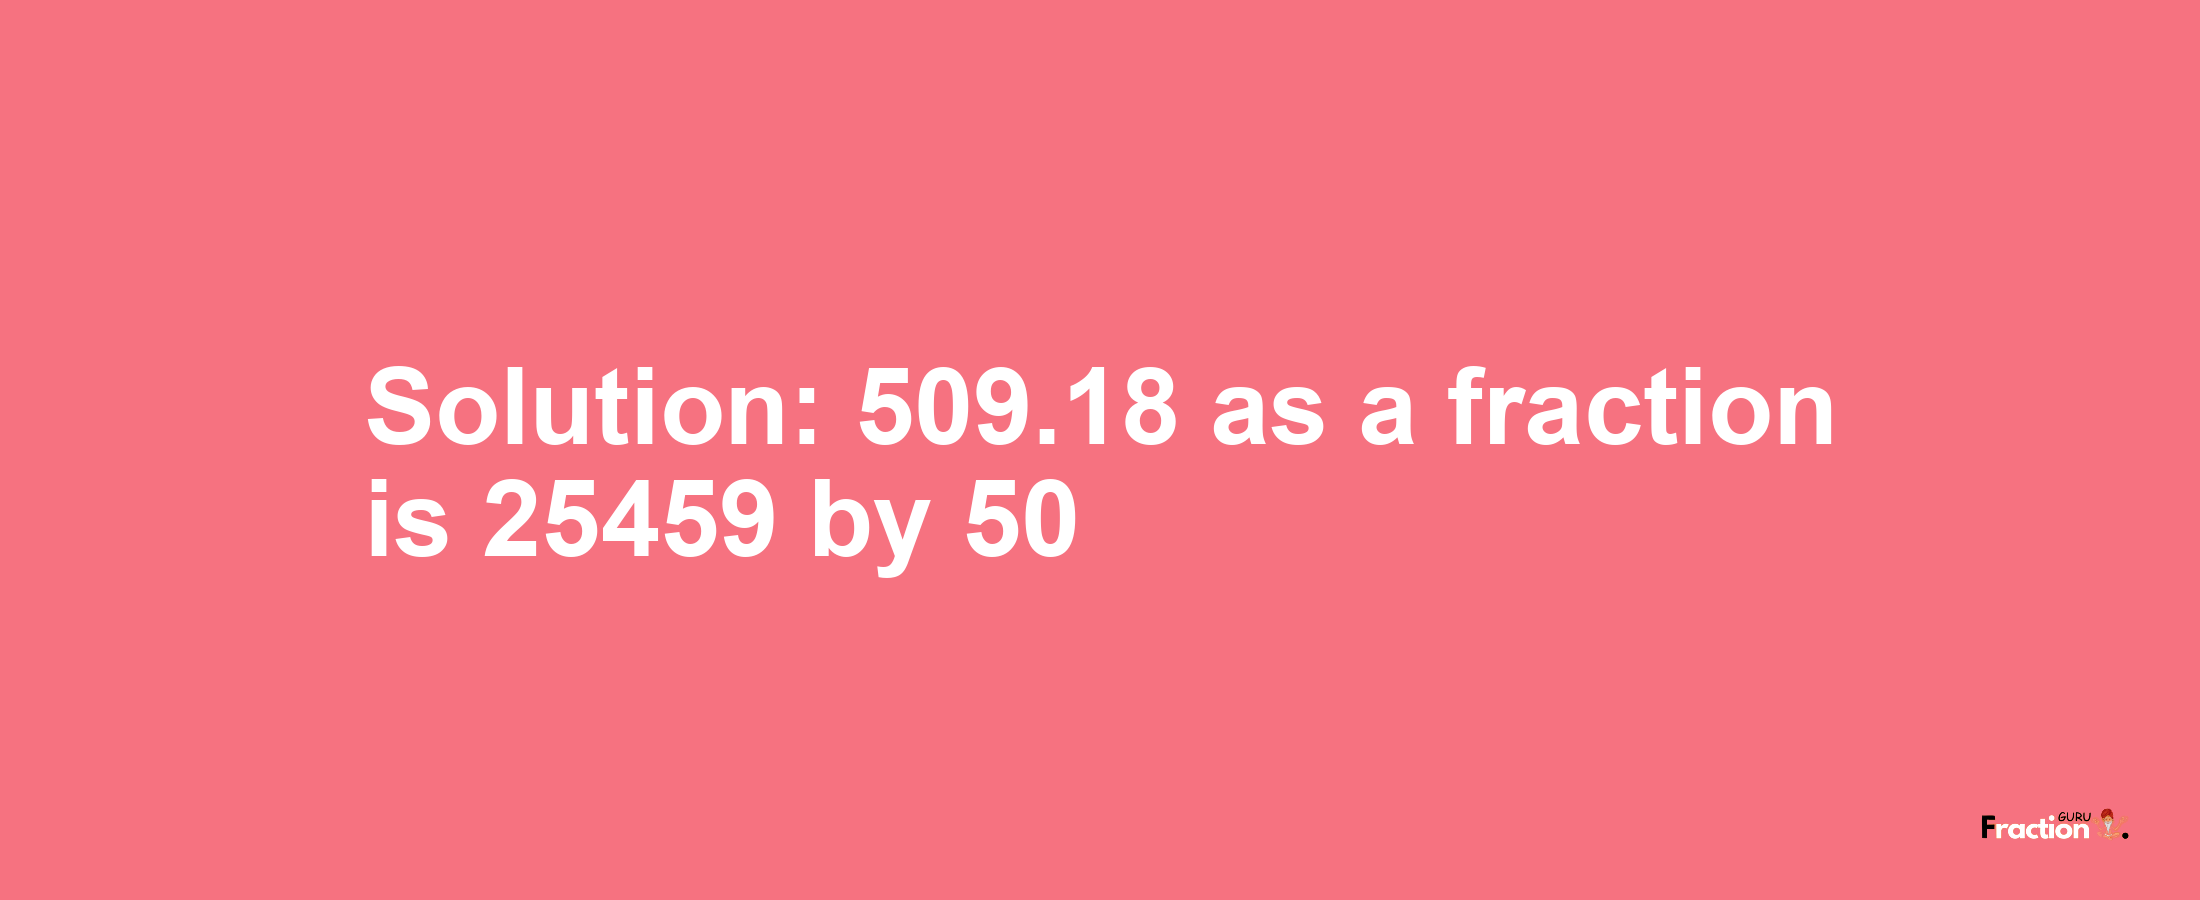 Solution:509.18 as a fraction is 25459/50